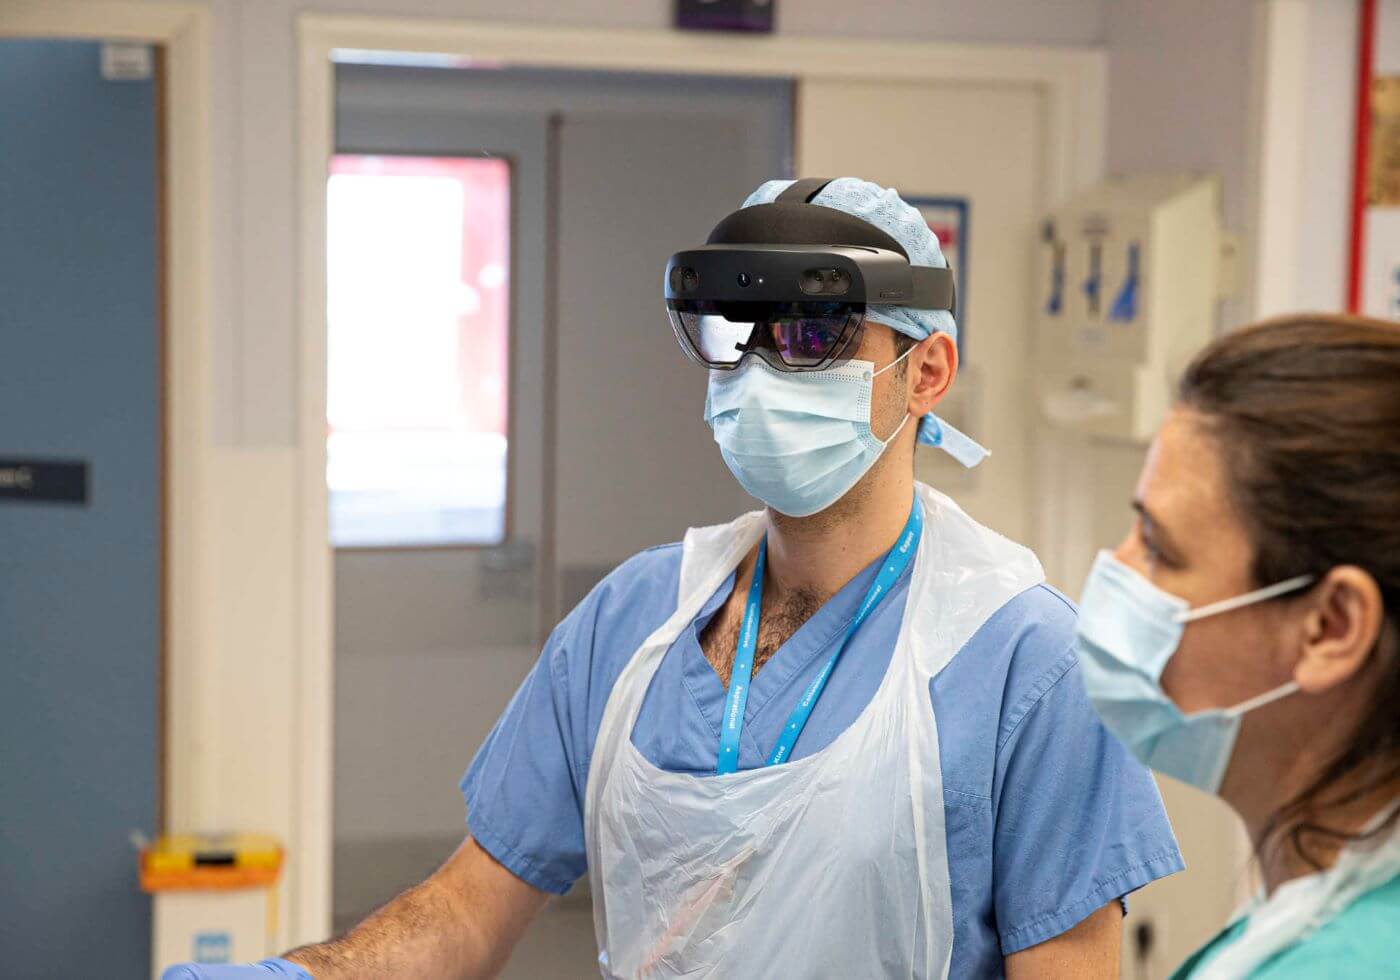 How Medics Are Using Mixed Reality to Treat COVID-19 Patients